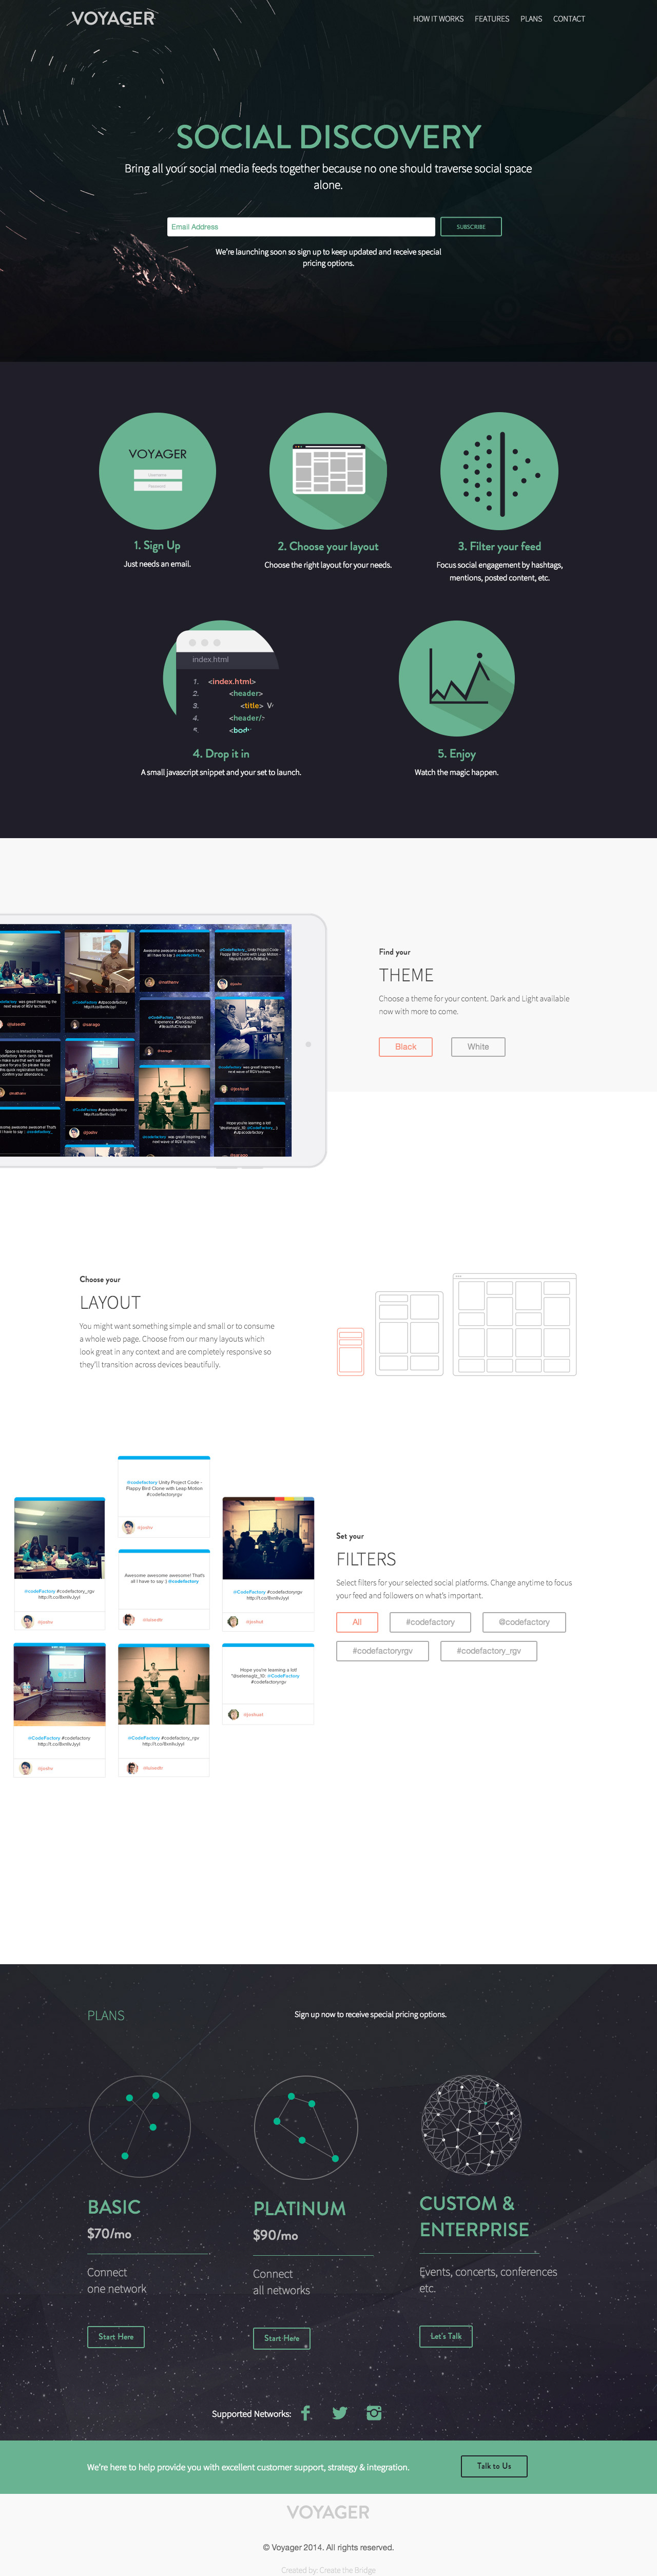 Voyager - One Page Website Award